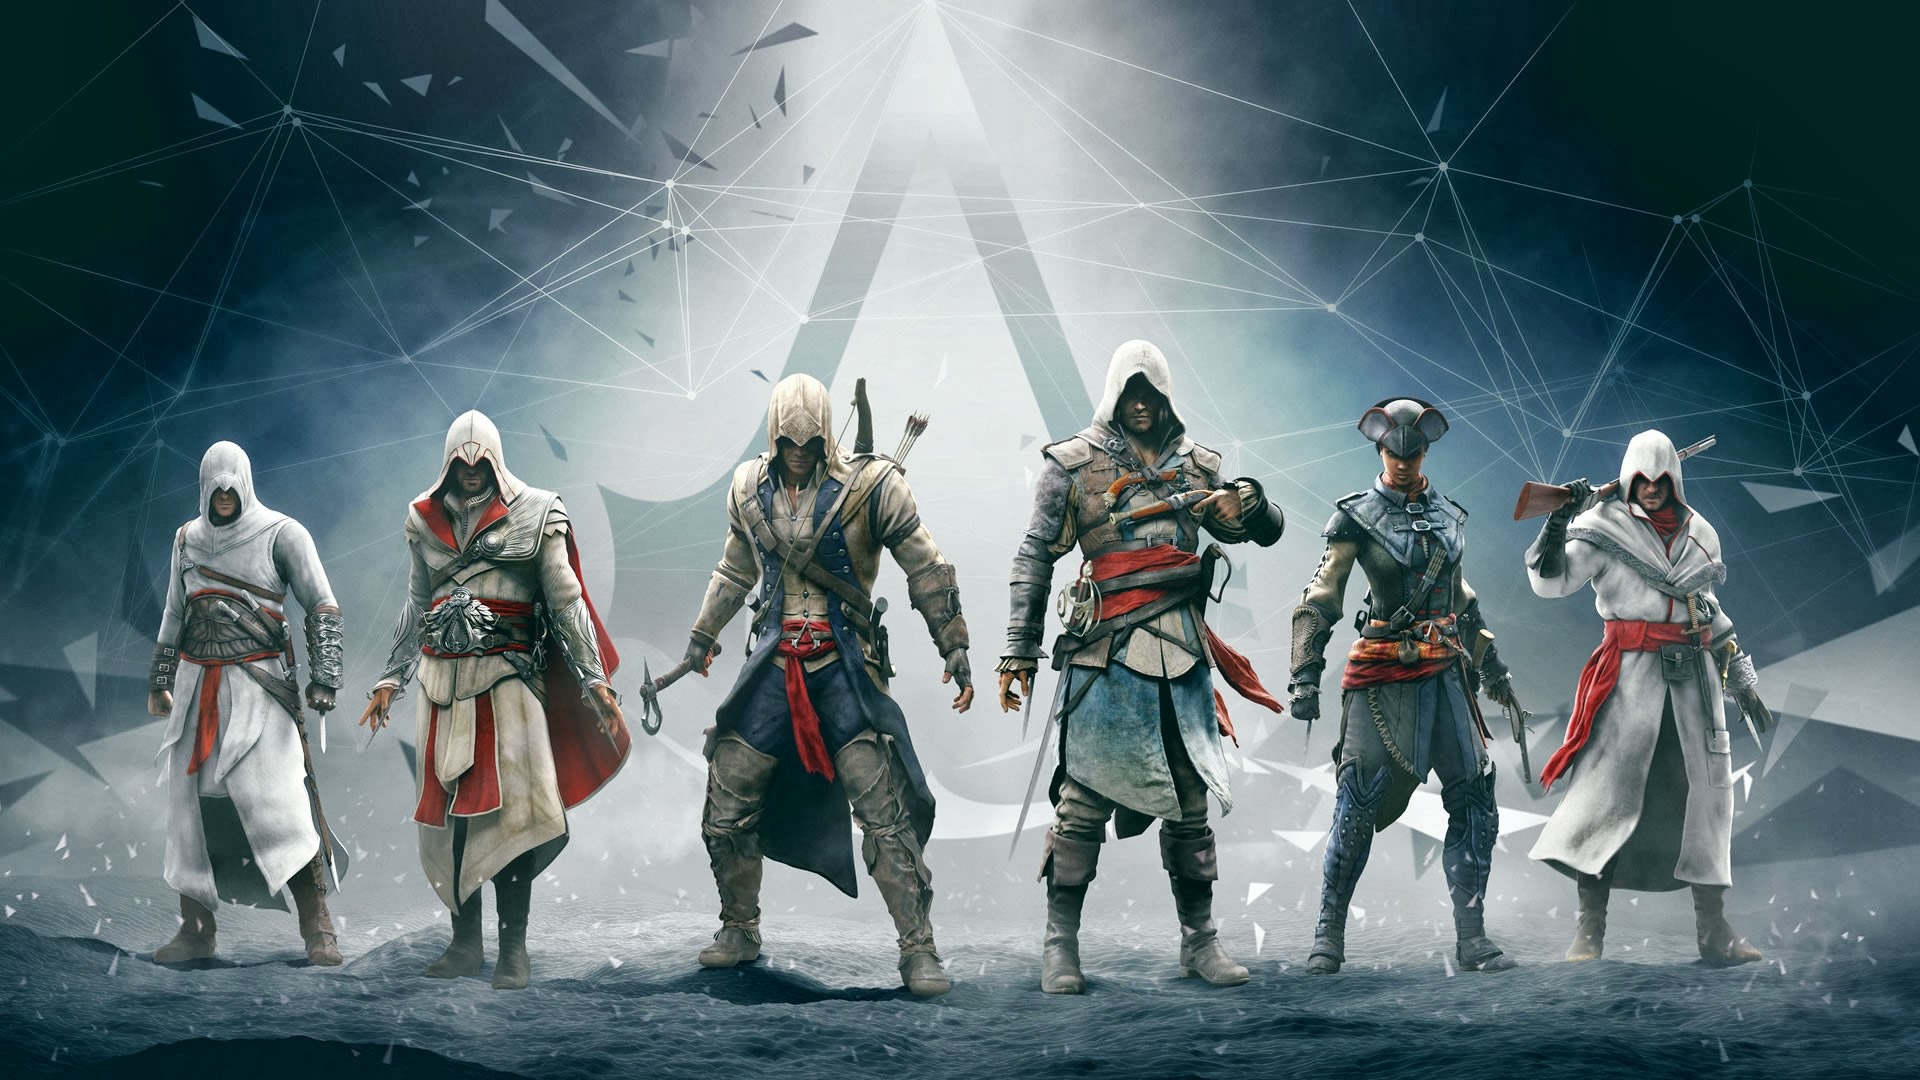 Showing Gallery For Assassins Creed Altair And Ezio Wallpaper